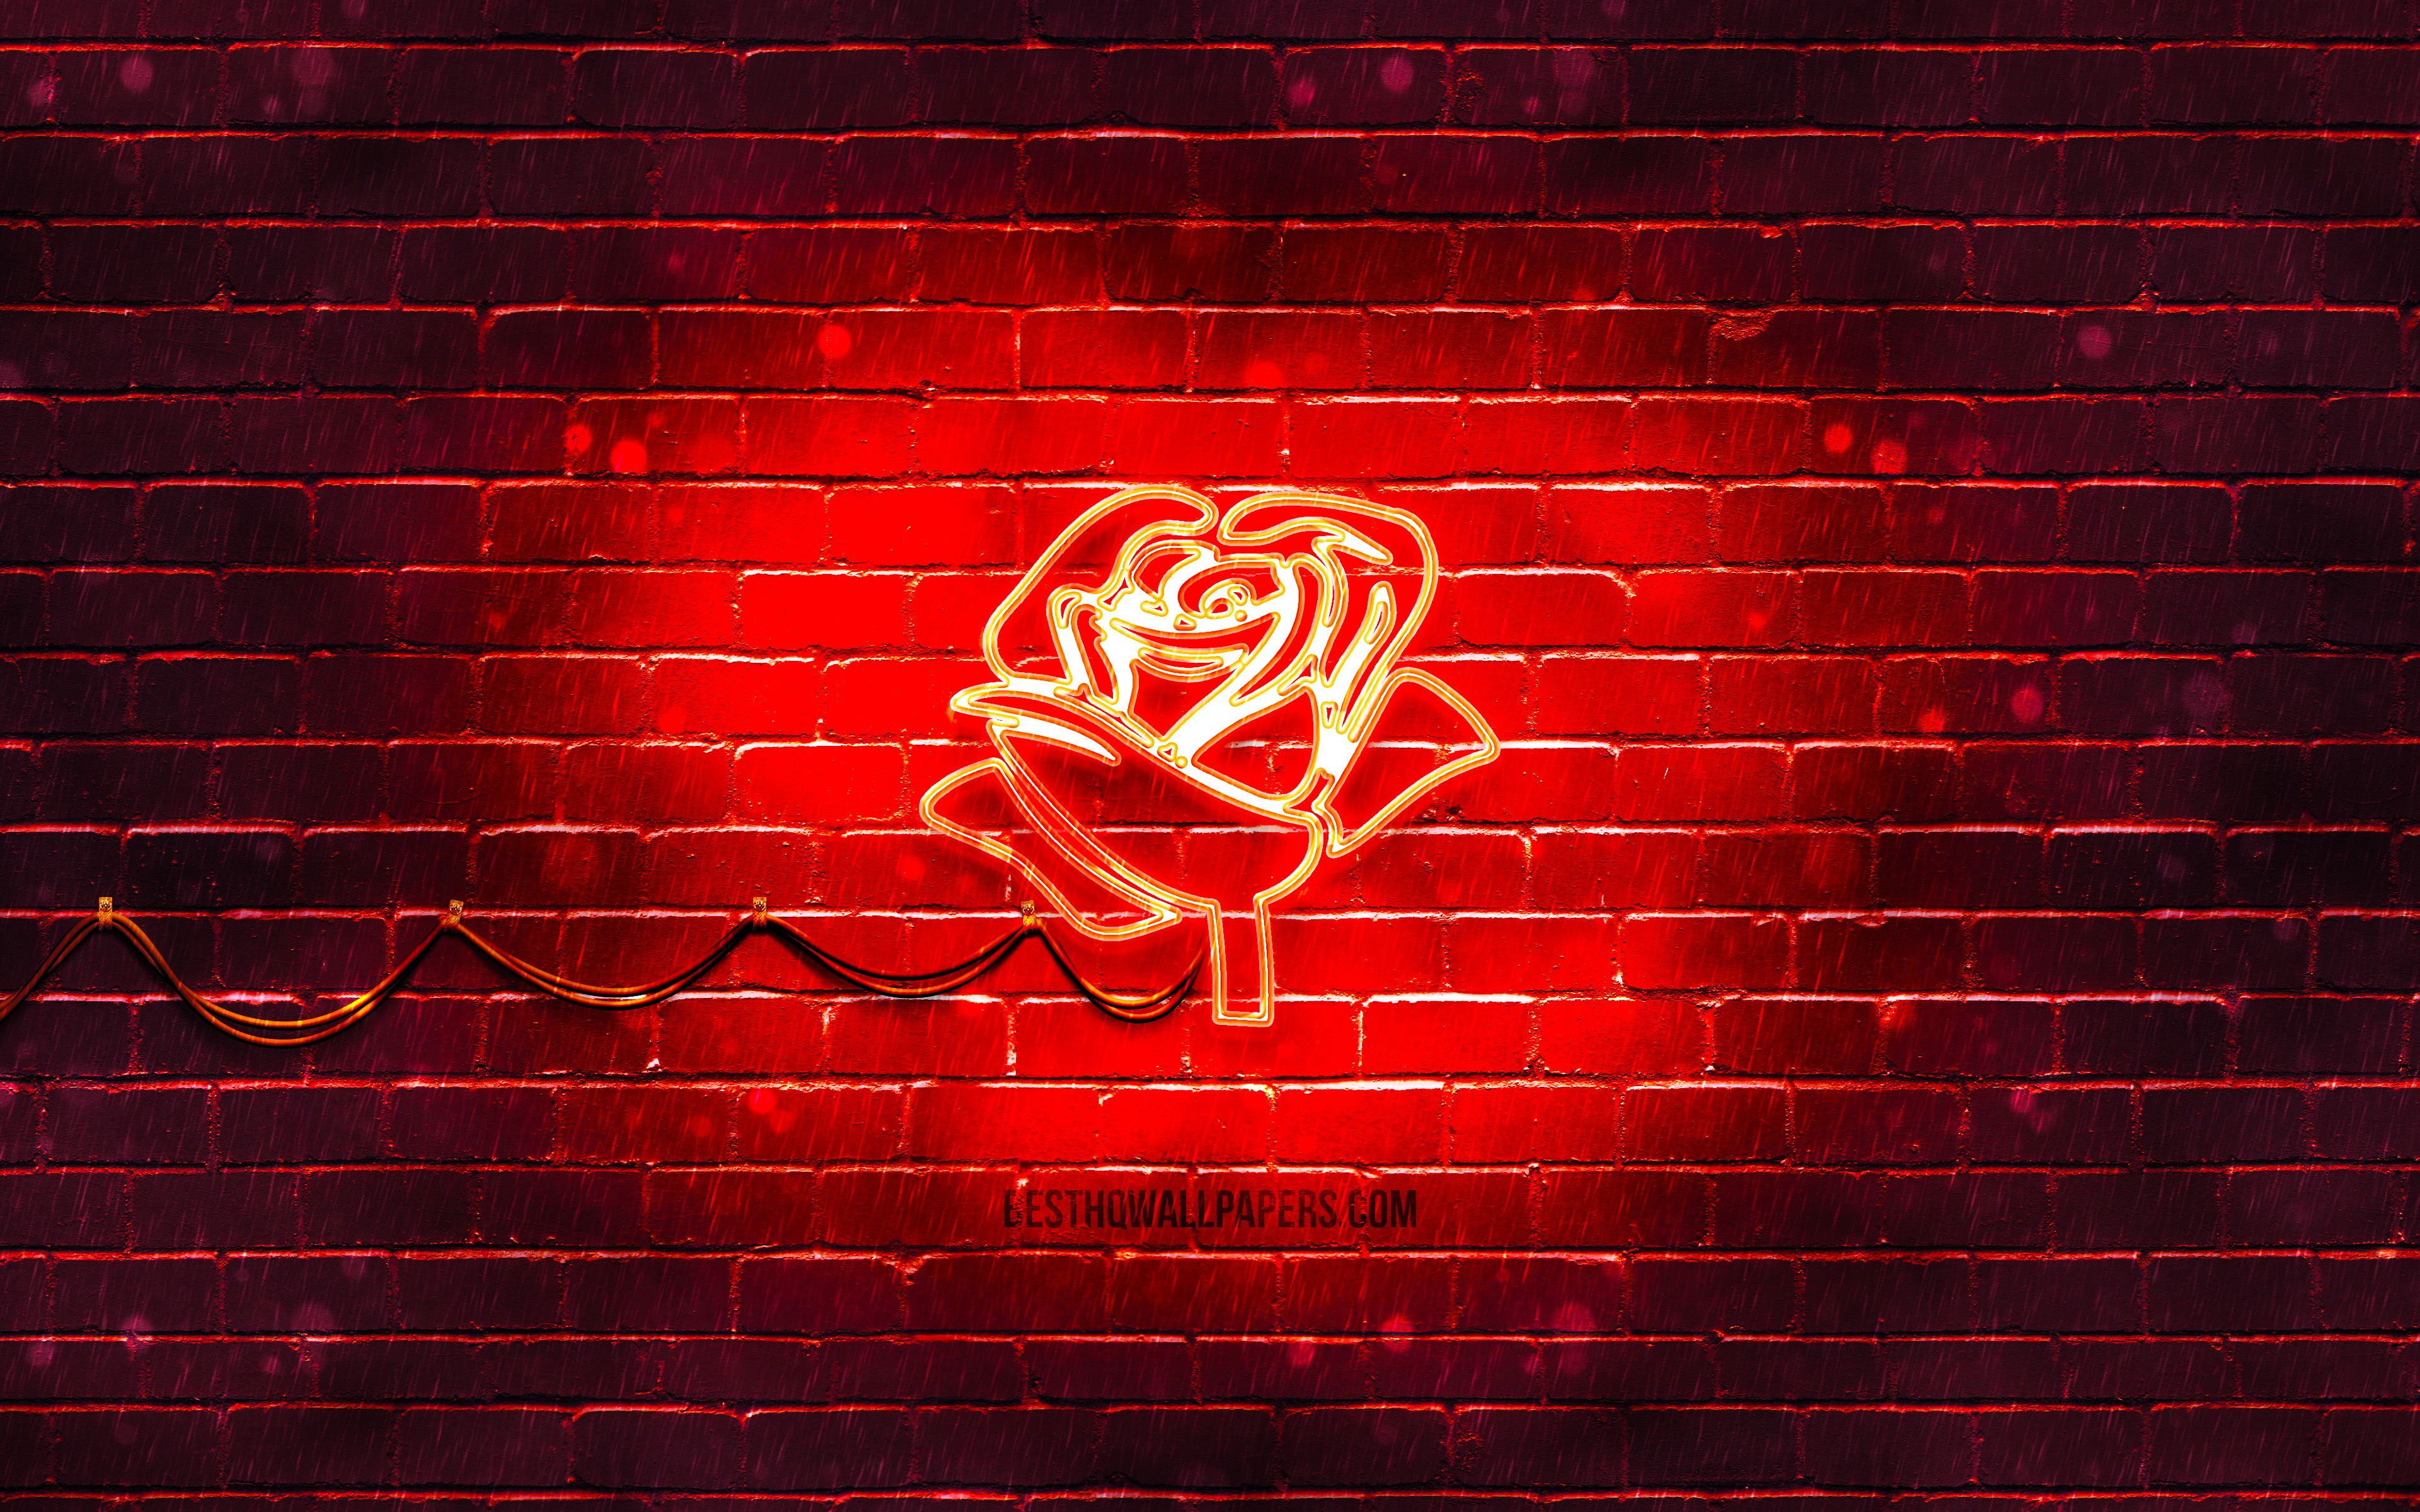 Red rose neon sign on a brick wall wallpaper - Neon red